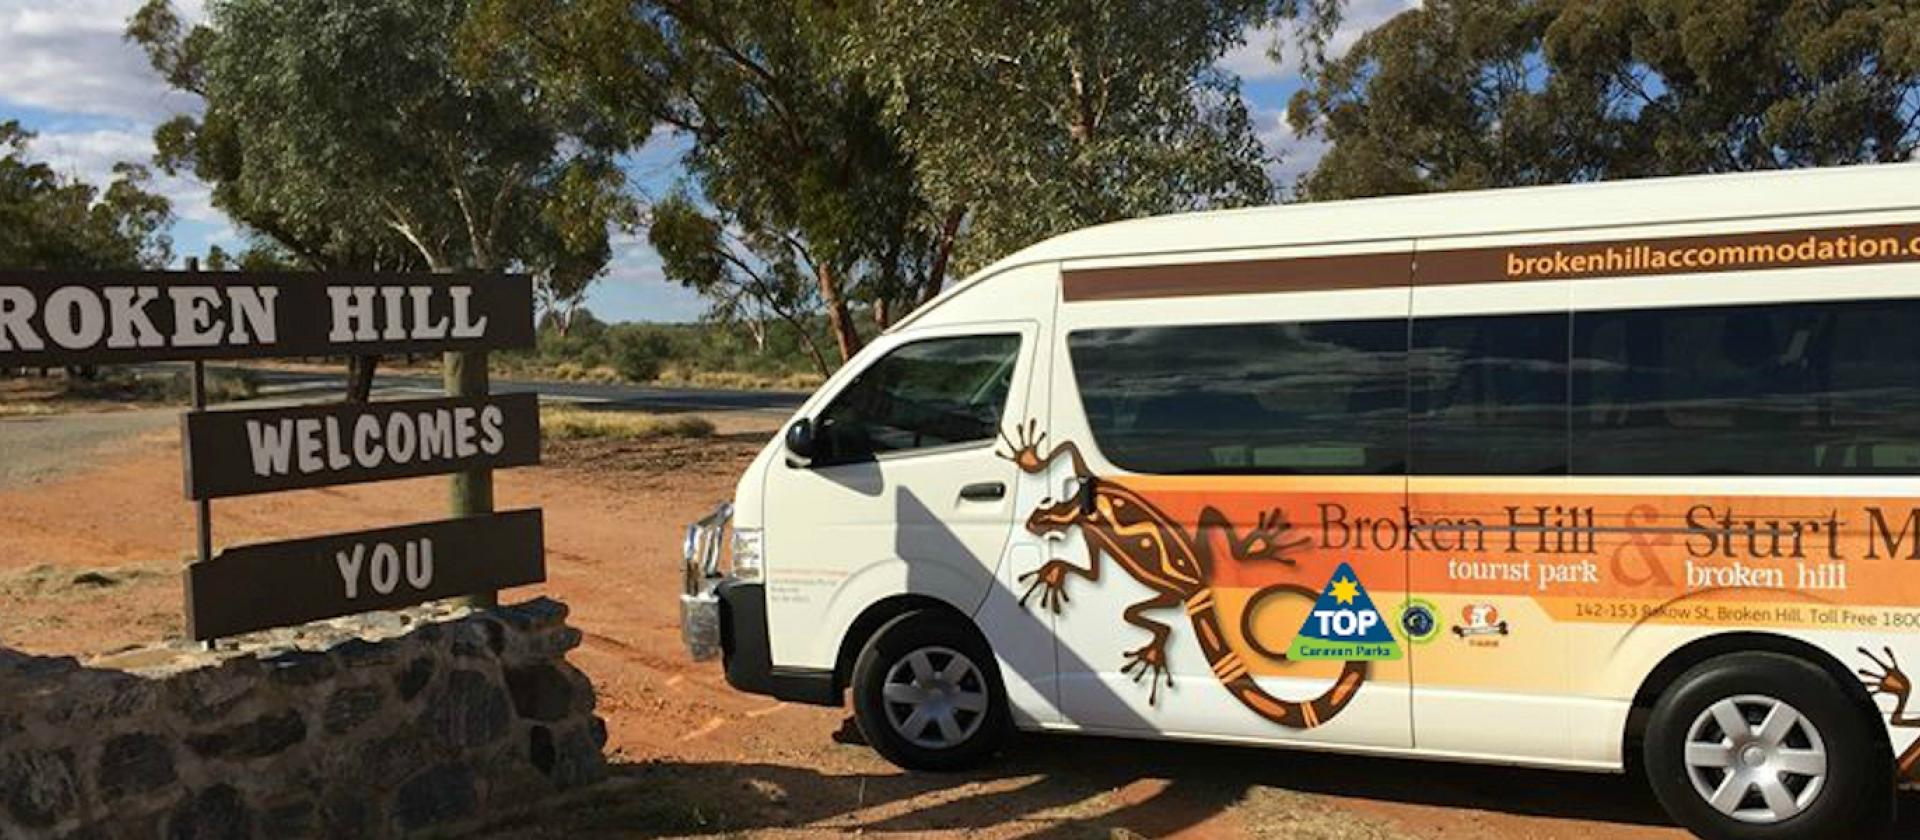 Experience Broken Hill like a local with Away Tours